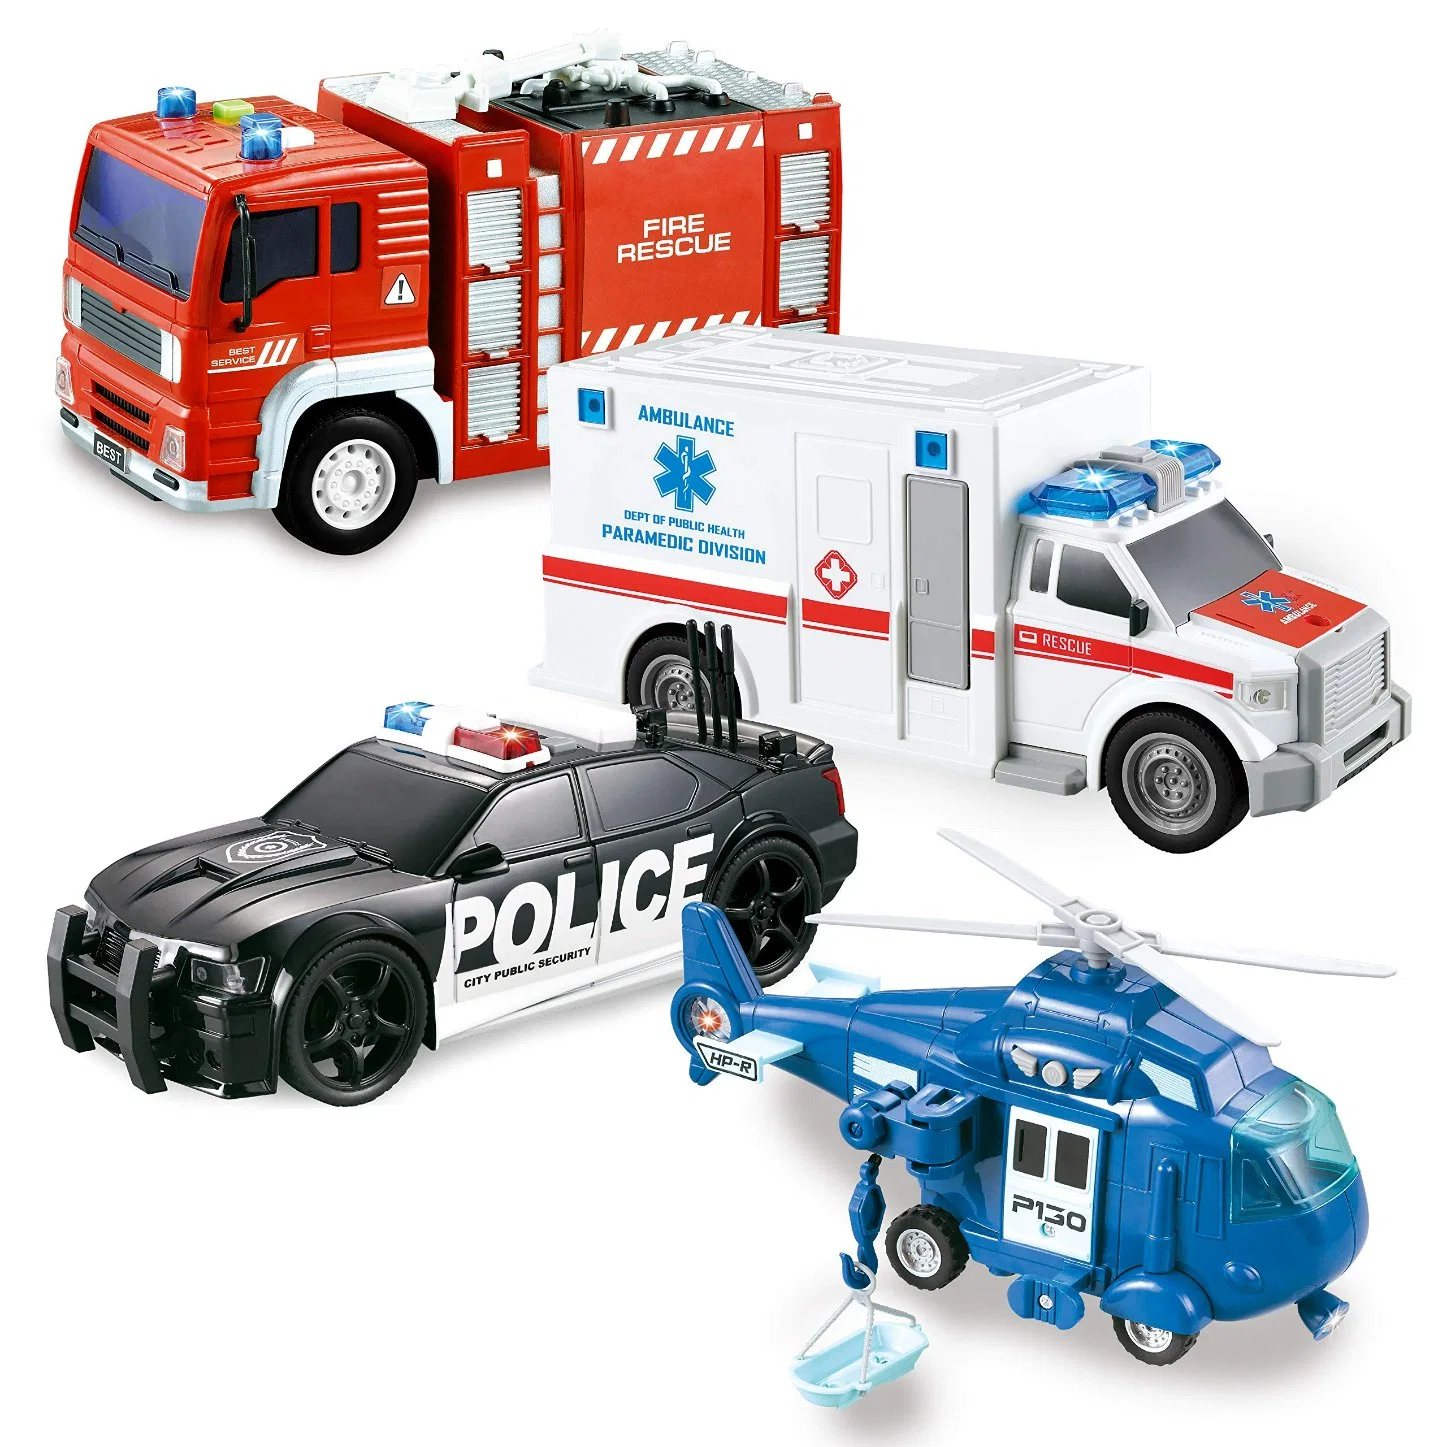 Hot Sale The Best Gift Toy for Boys Emergency Vehicle Toy Playsets